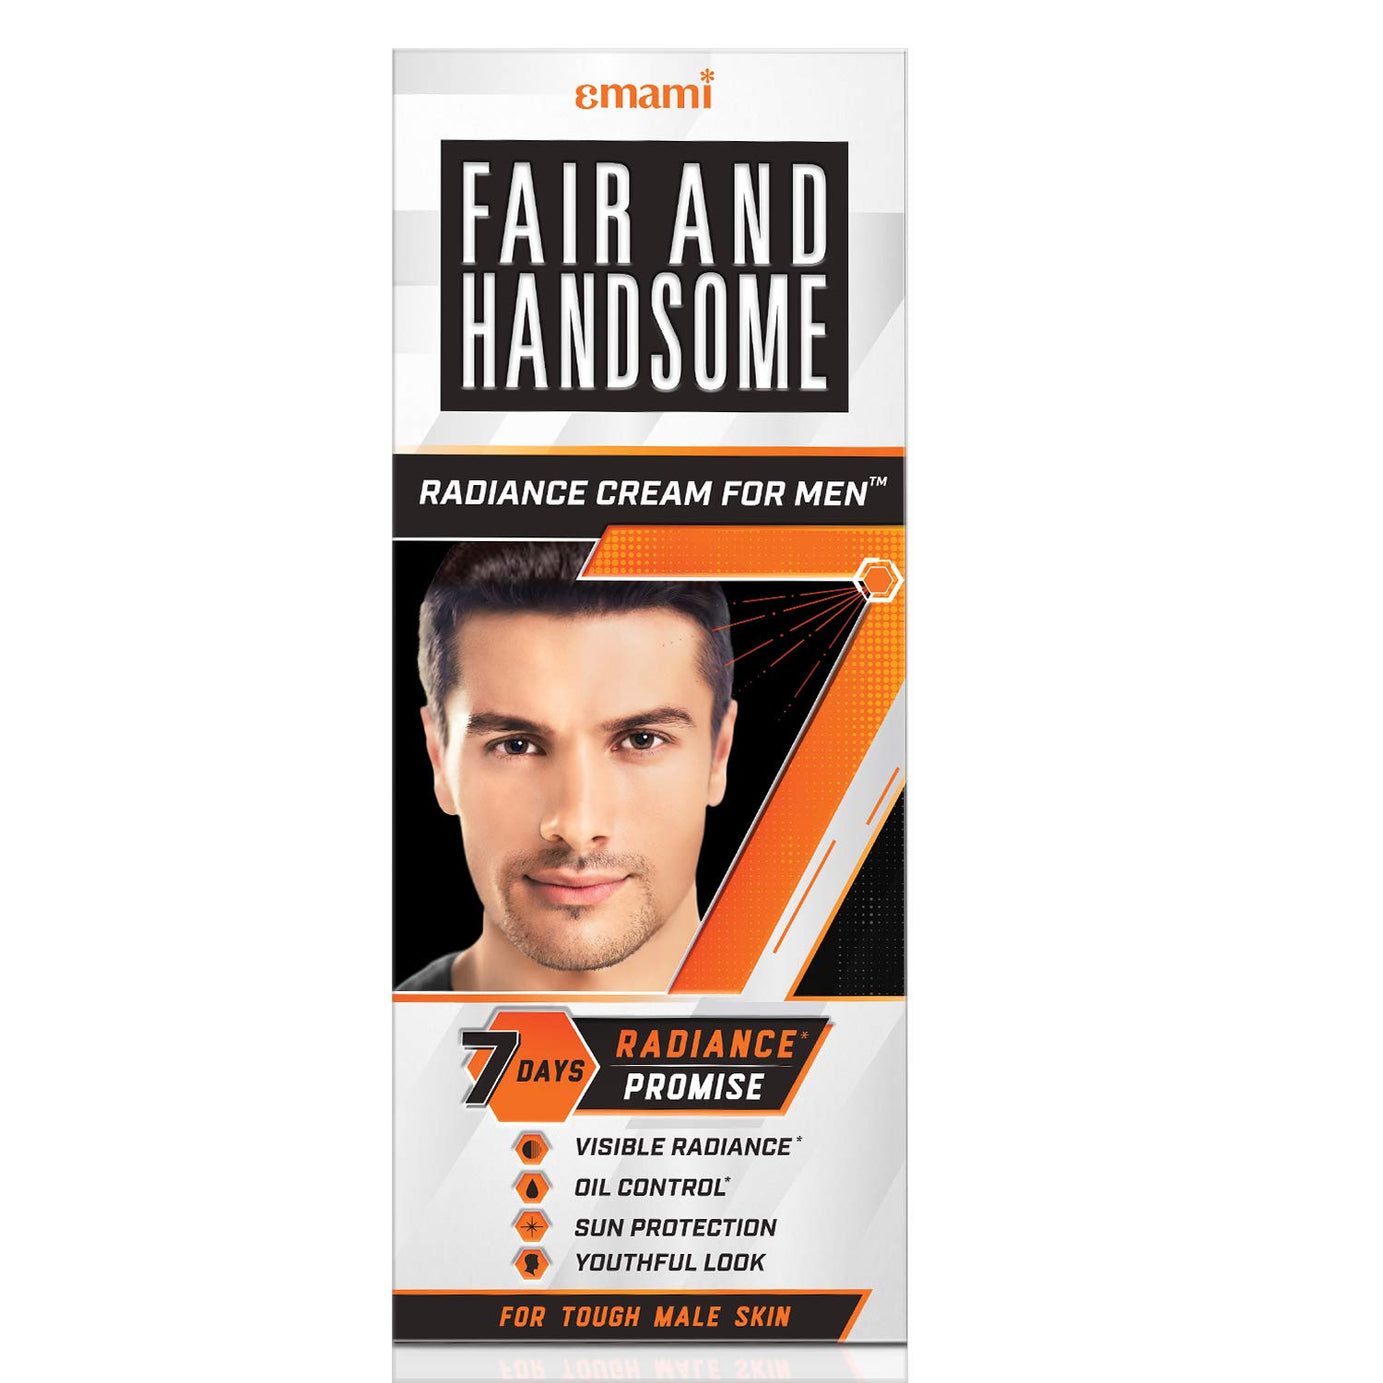 Shop Emami Fair and Handsome Radiance Cream for men 30gm at price 80.00 from Emami Online - Ayush Care